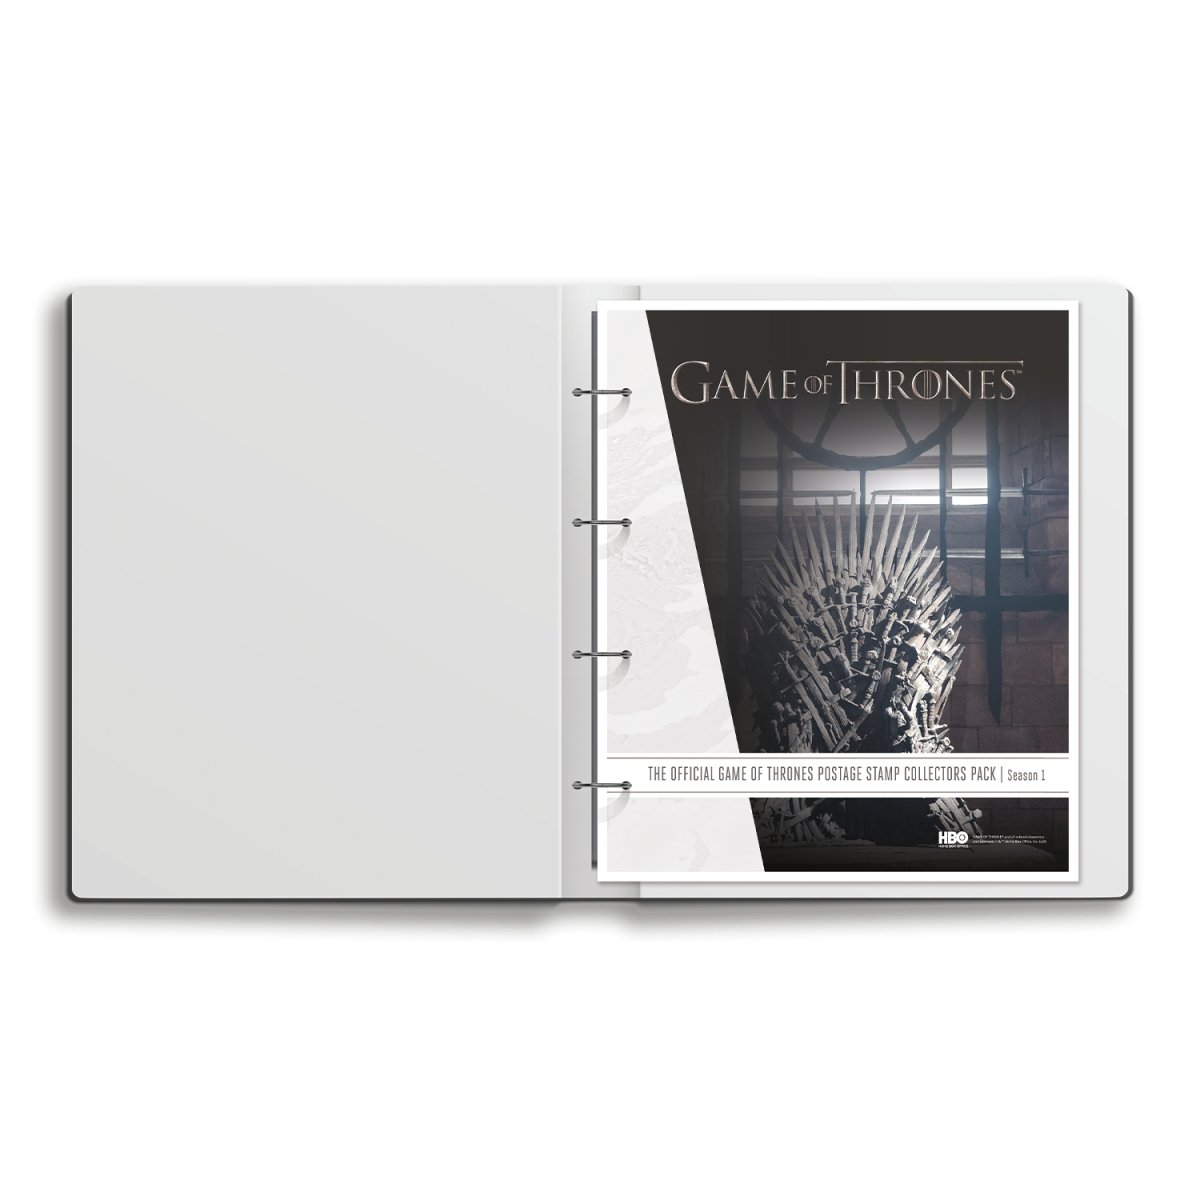 Verzamelalbum “The Official Game Of Thrones Collectors Packs” - Edel Collecties